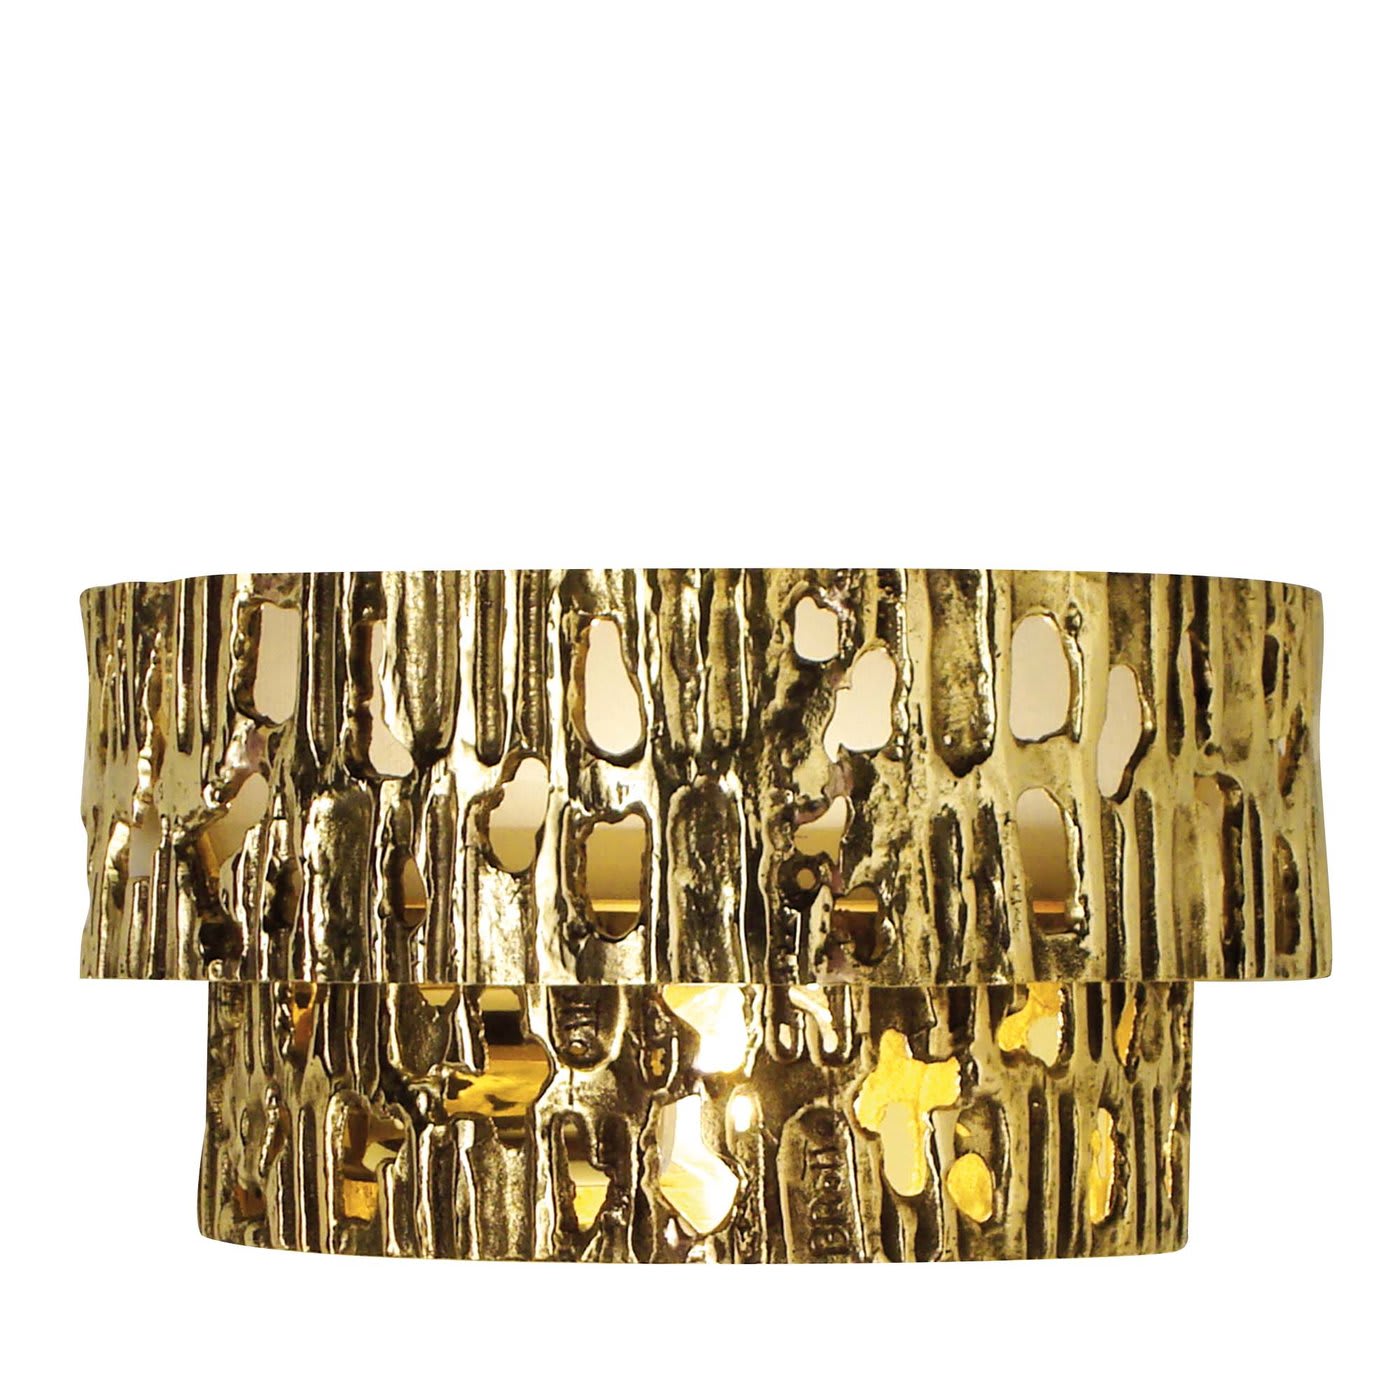 Due Fasce Sconce by Angelo Brotto - Esperia Luci